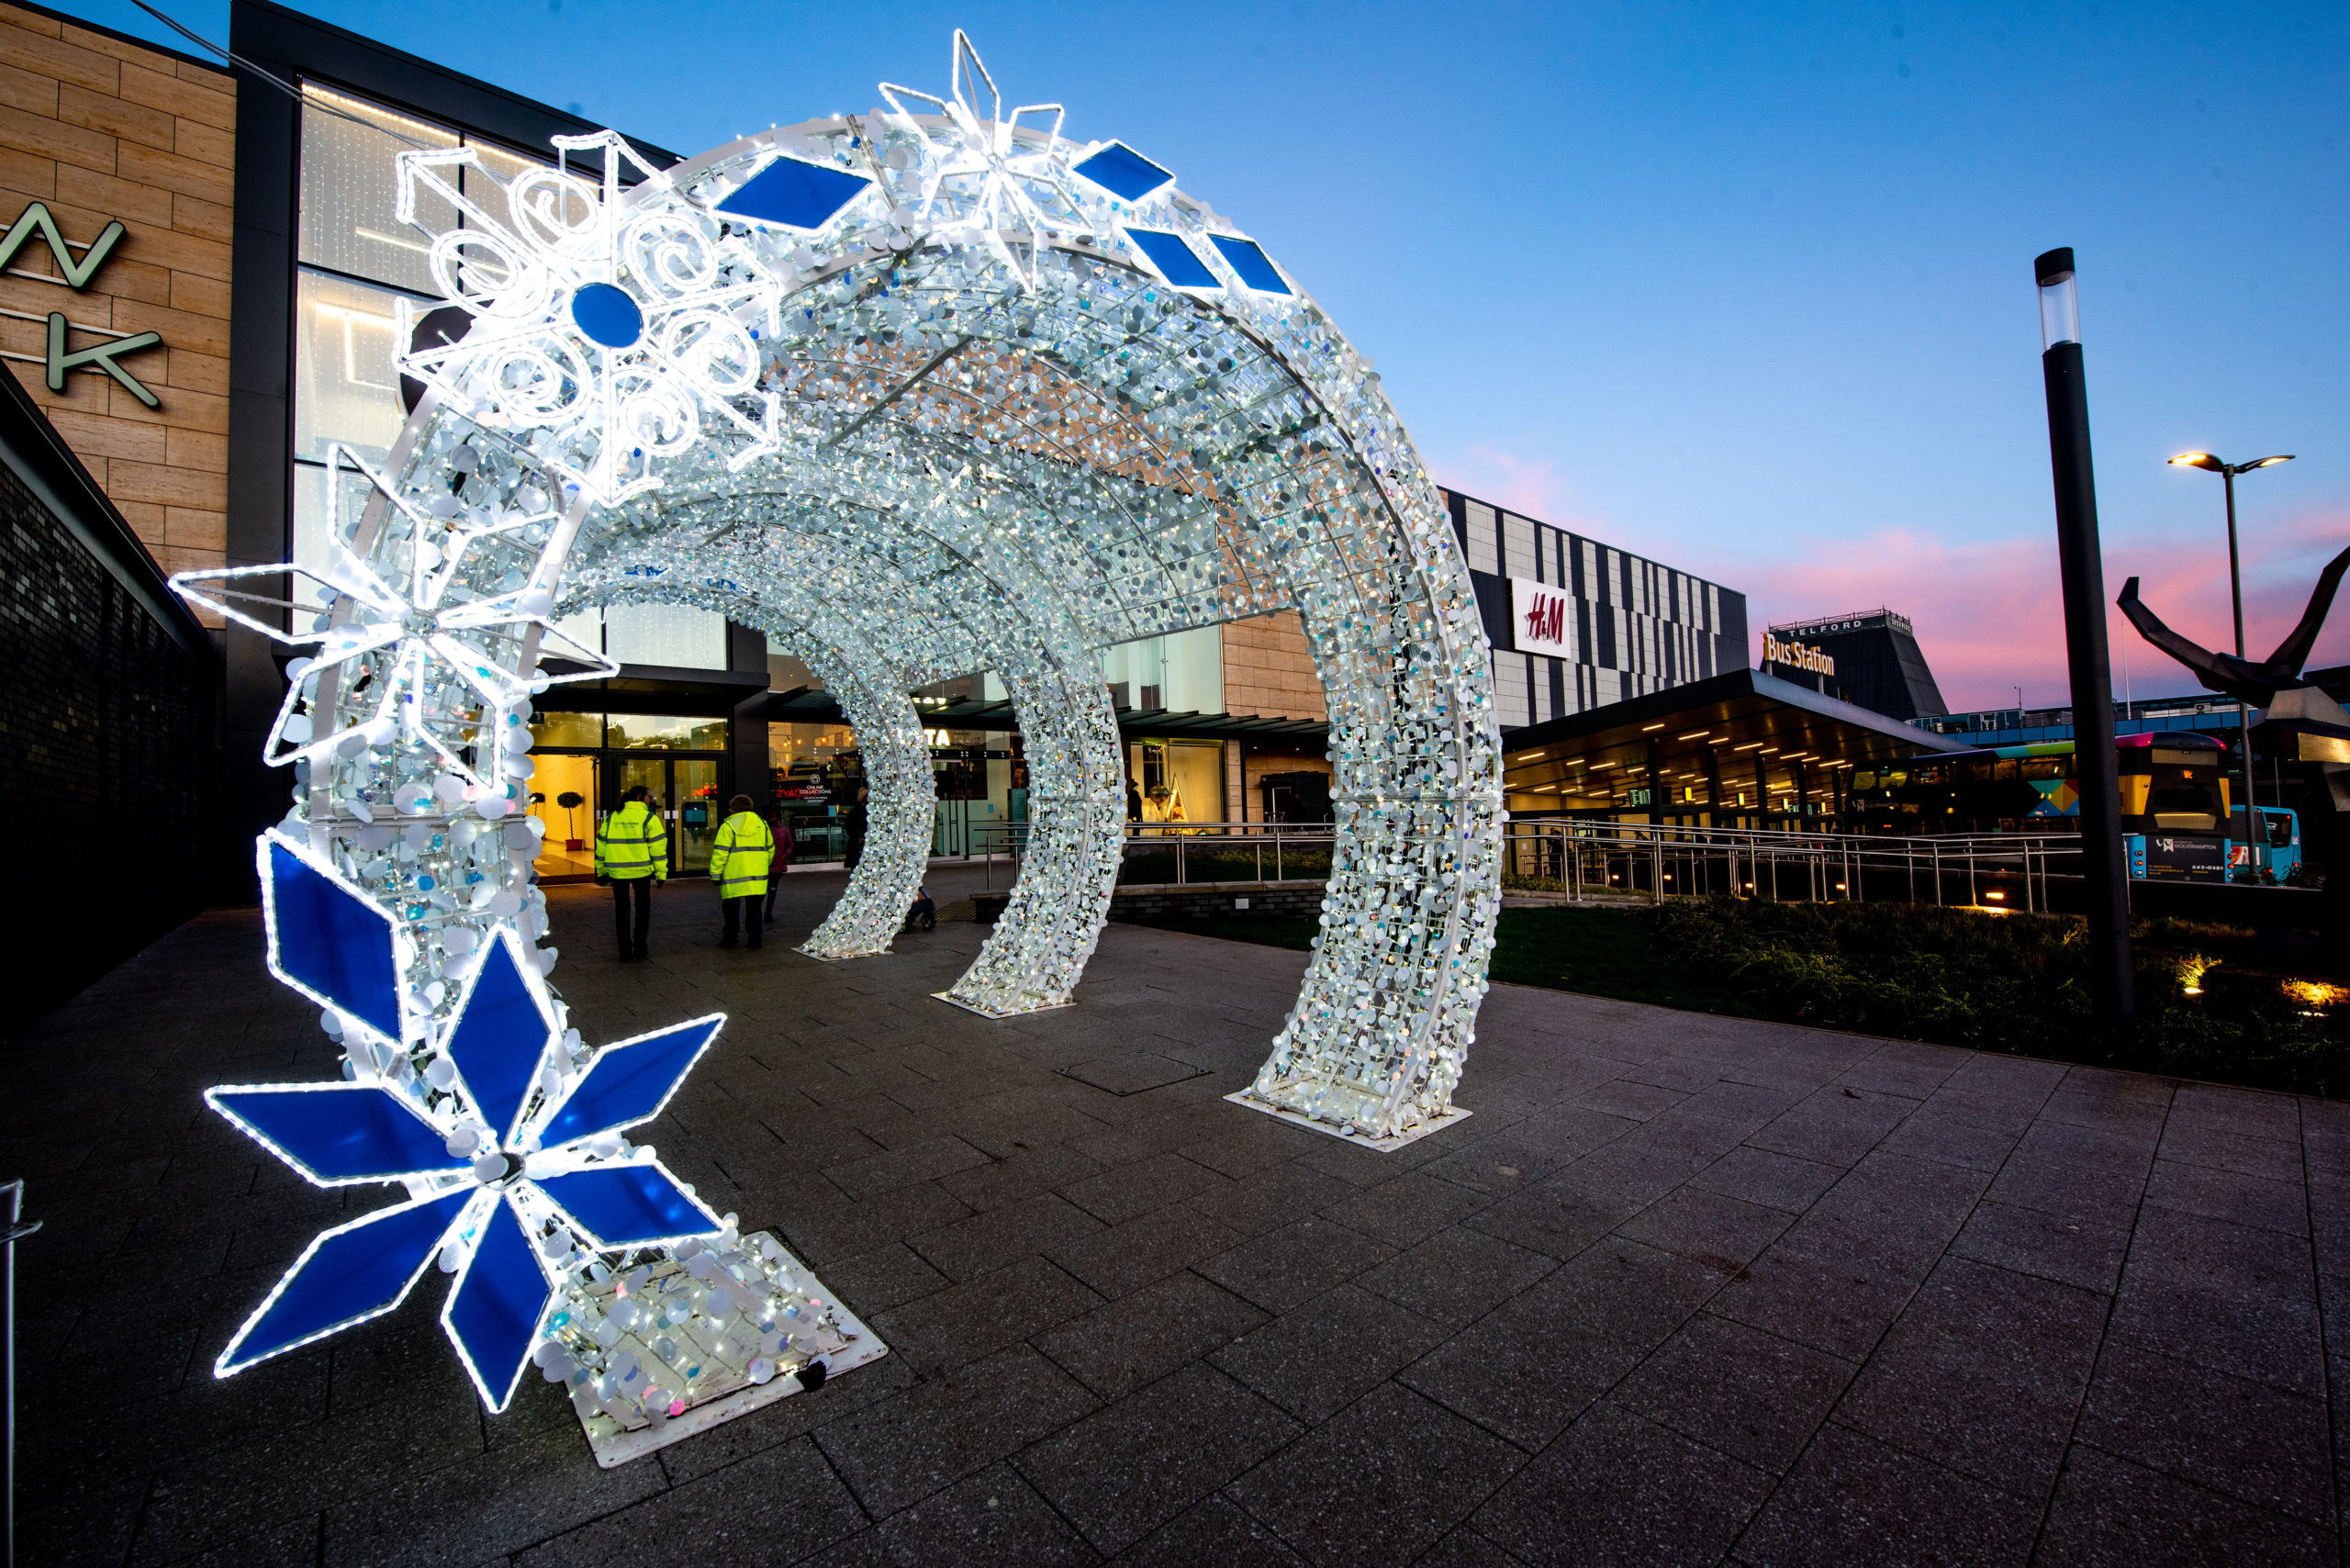 Bright white light up cylinder walkthrough tunnel decorated with silver tinsel and white and blue snowflakes leading to the entrance of Telford Shopping Centre.